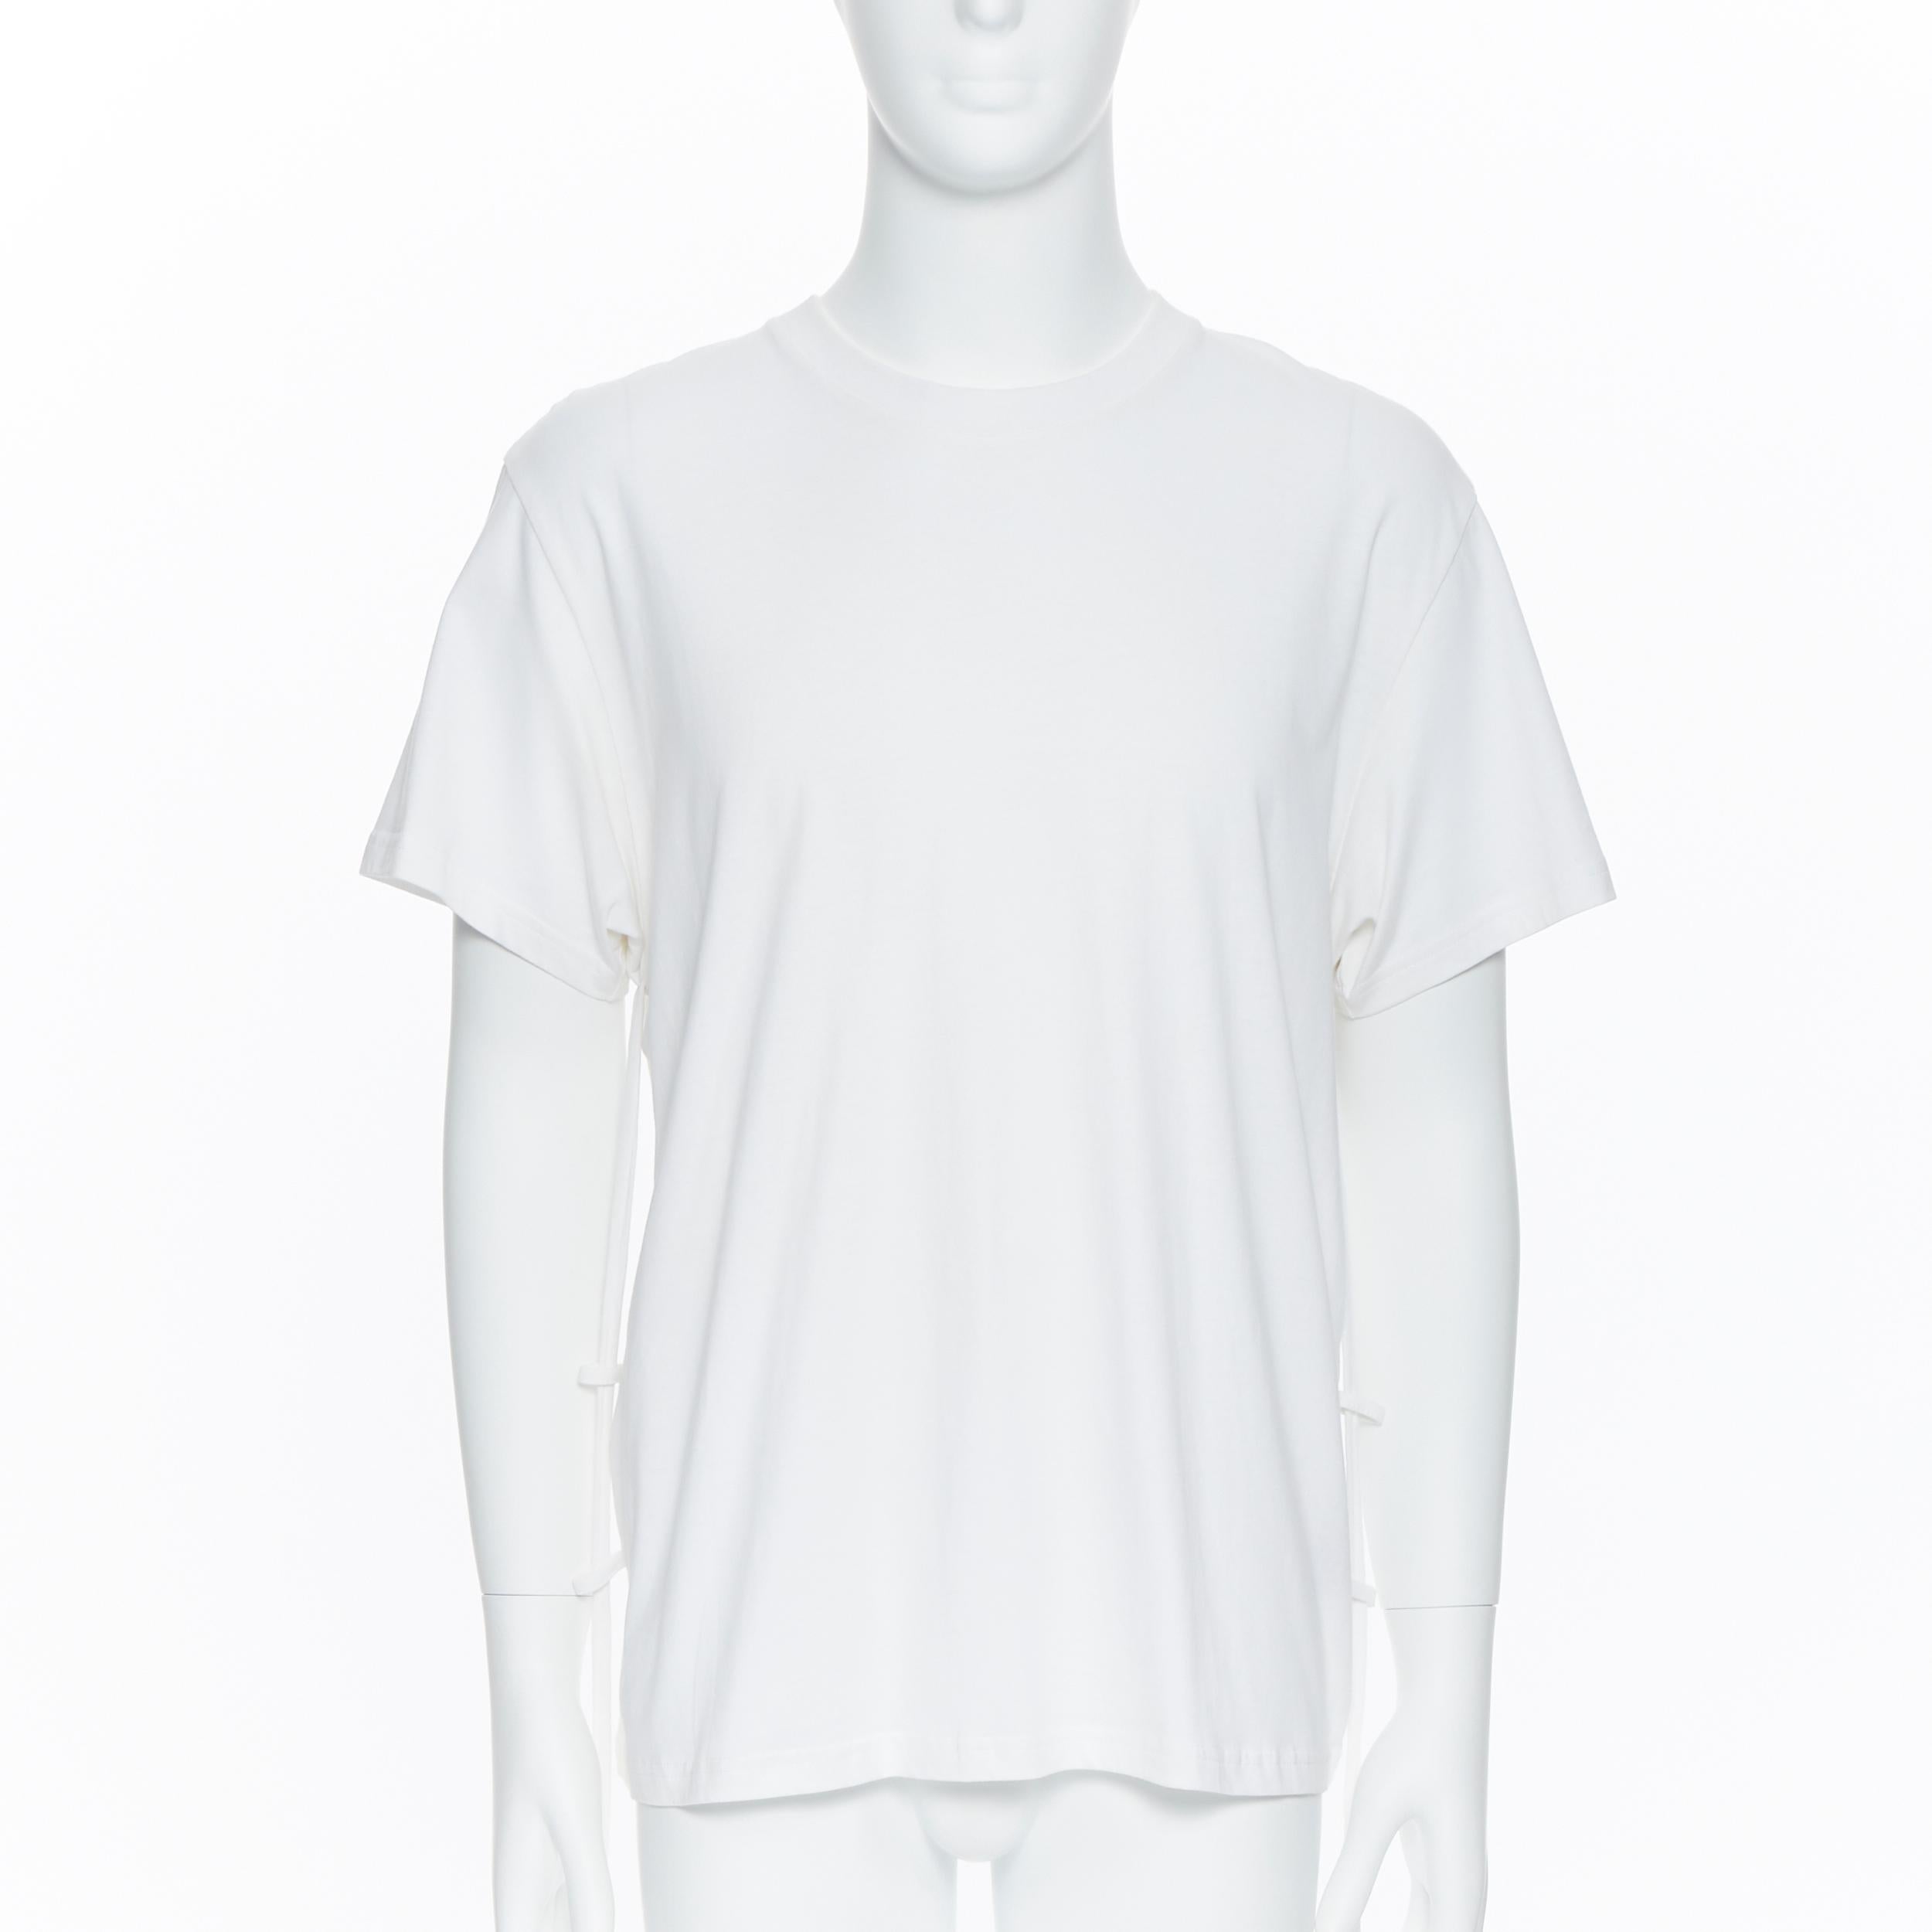 CRAIG GREEN white cotton weighed drawstring strap short sleeve t-shirt top M
Brand: Craig Green
Designer: Craig Green
Model Name / Style: T-shirt
Material: Cotton
Color: White
Pattern: Solid
Extra Detail: Short sleeve. Crew neck neckline.
Made in: